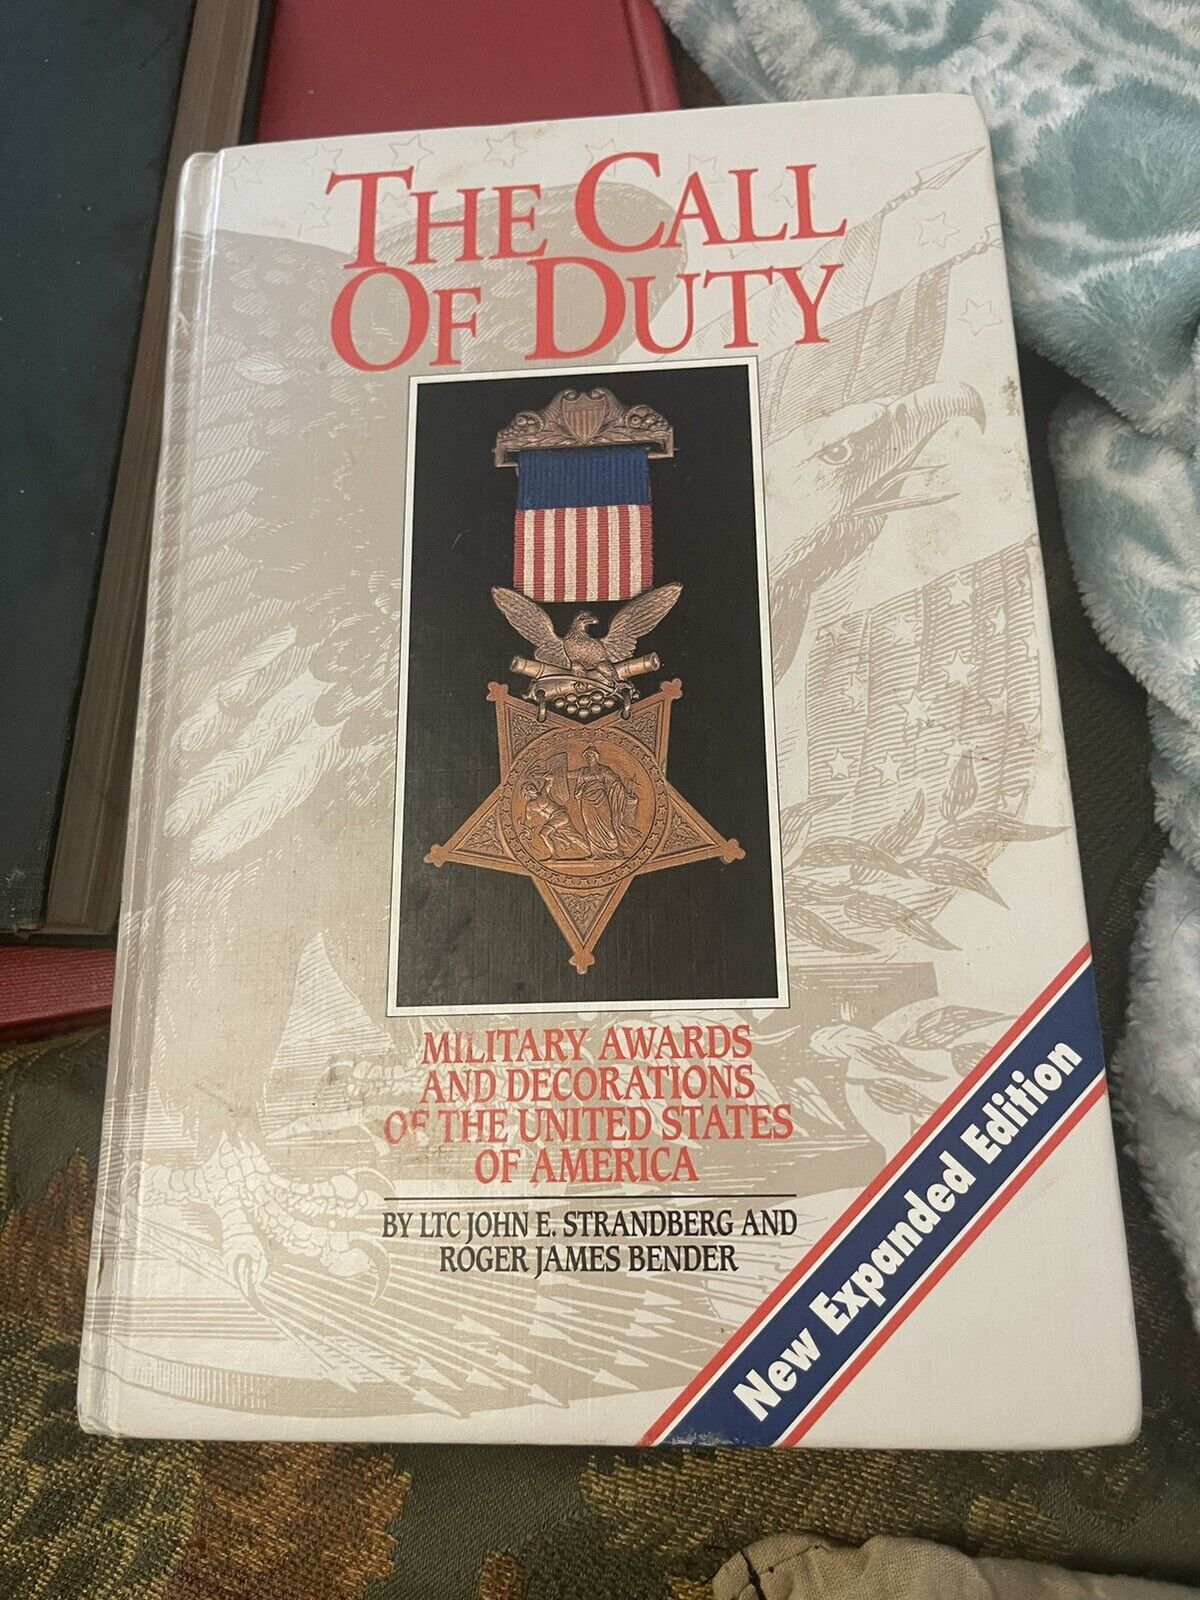 US The Call of Duty Military Awards and Decorations Reference Book Expanded Ed.